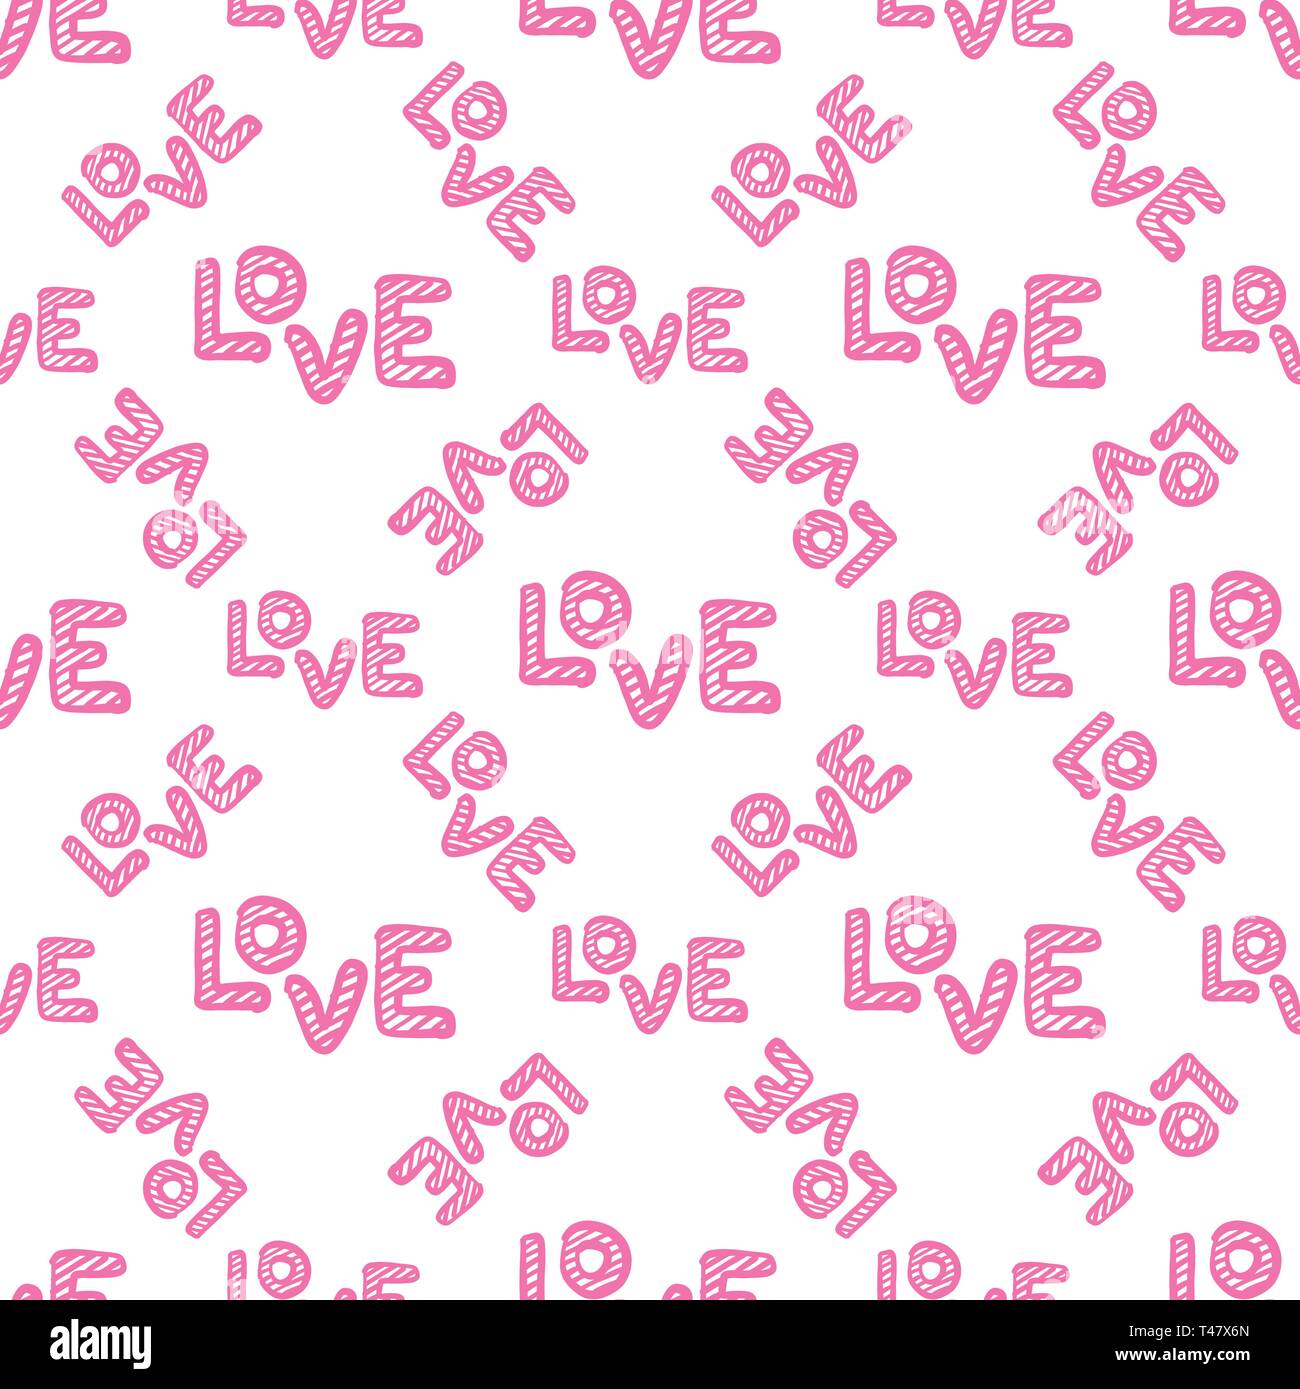 Love seamless pattern. Happy Valentines Day greeting card. Stock Vector